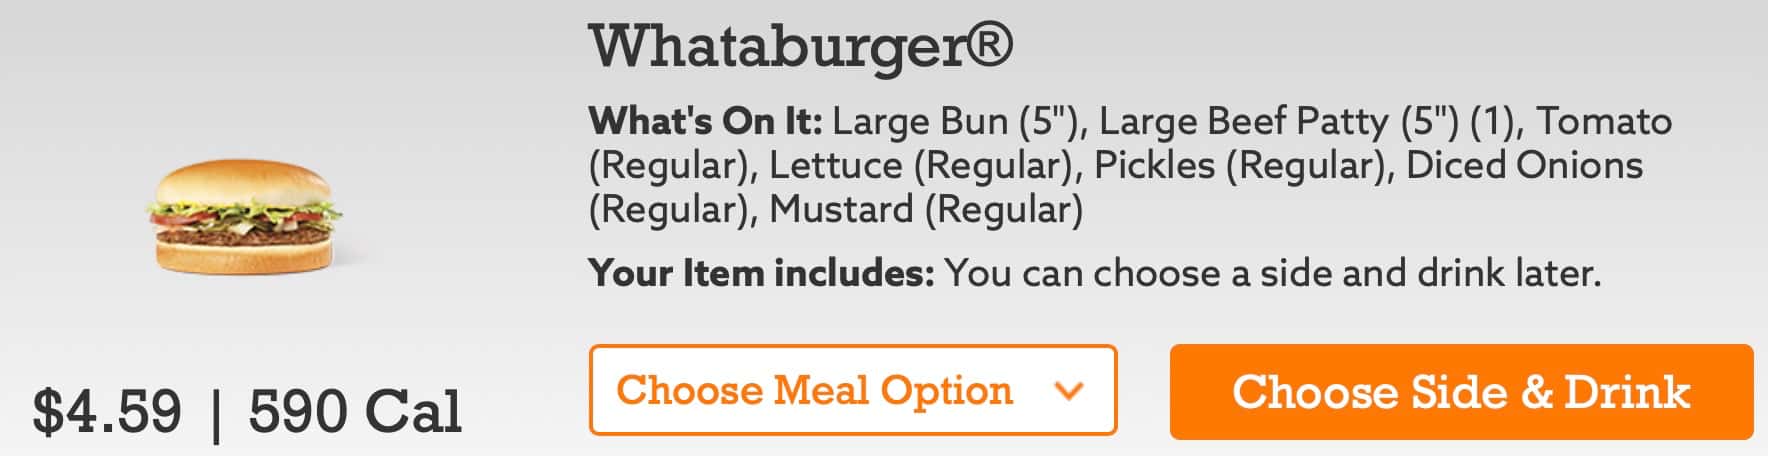 Whataburger Burgers Menu With Prices